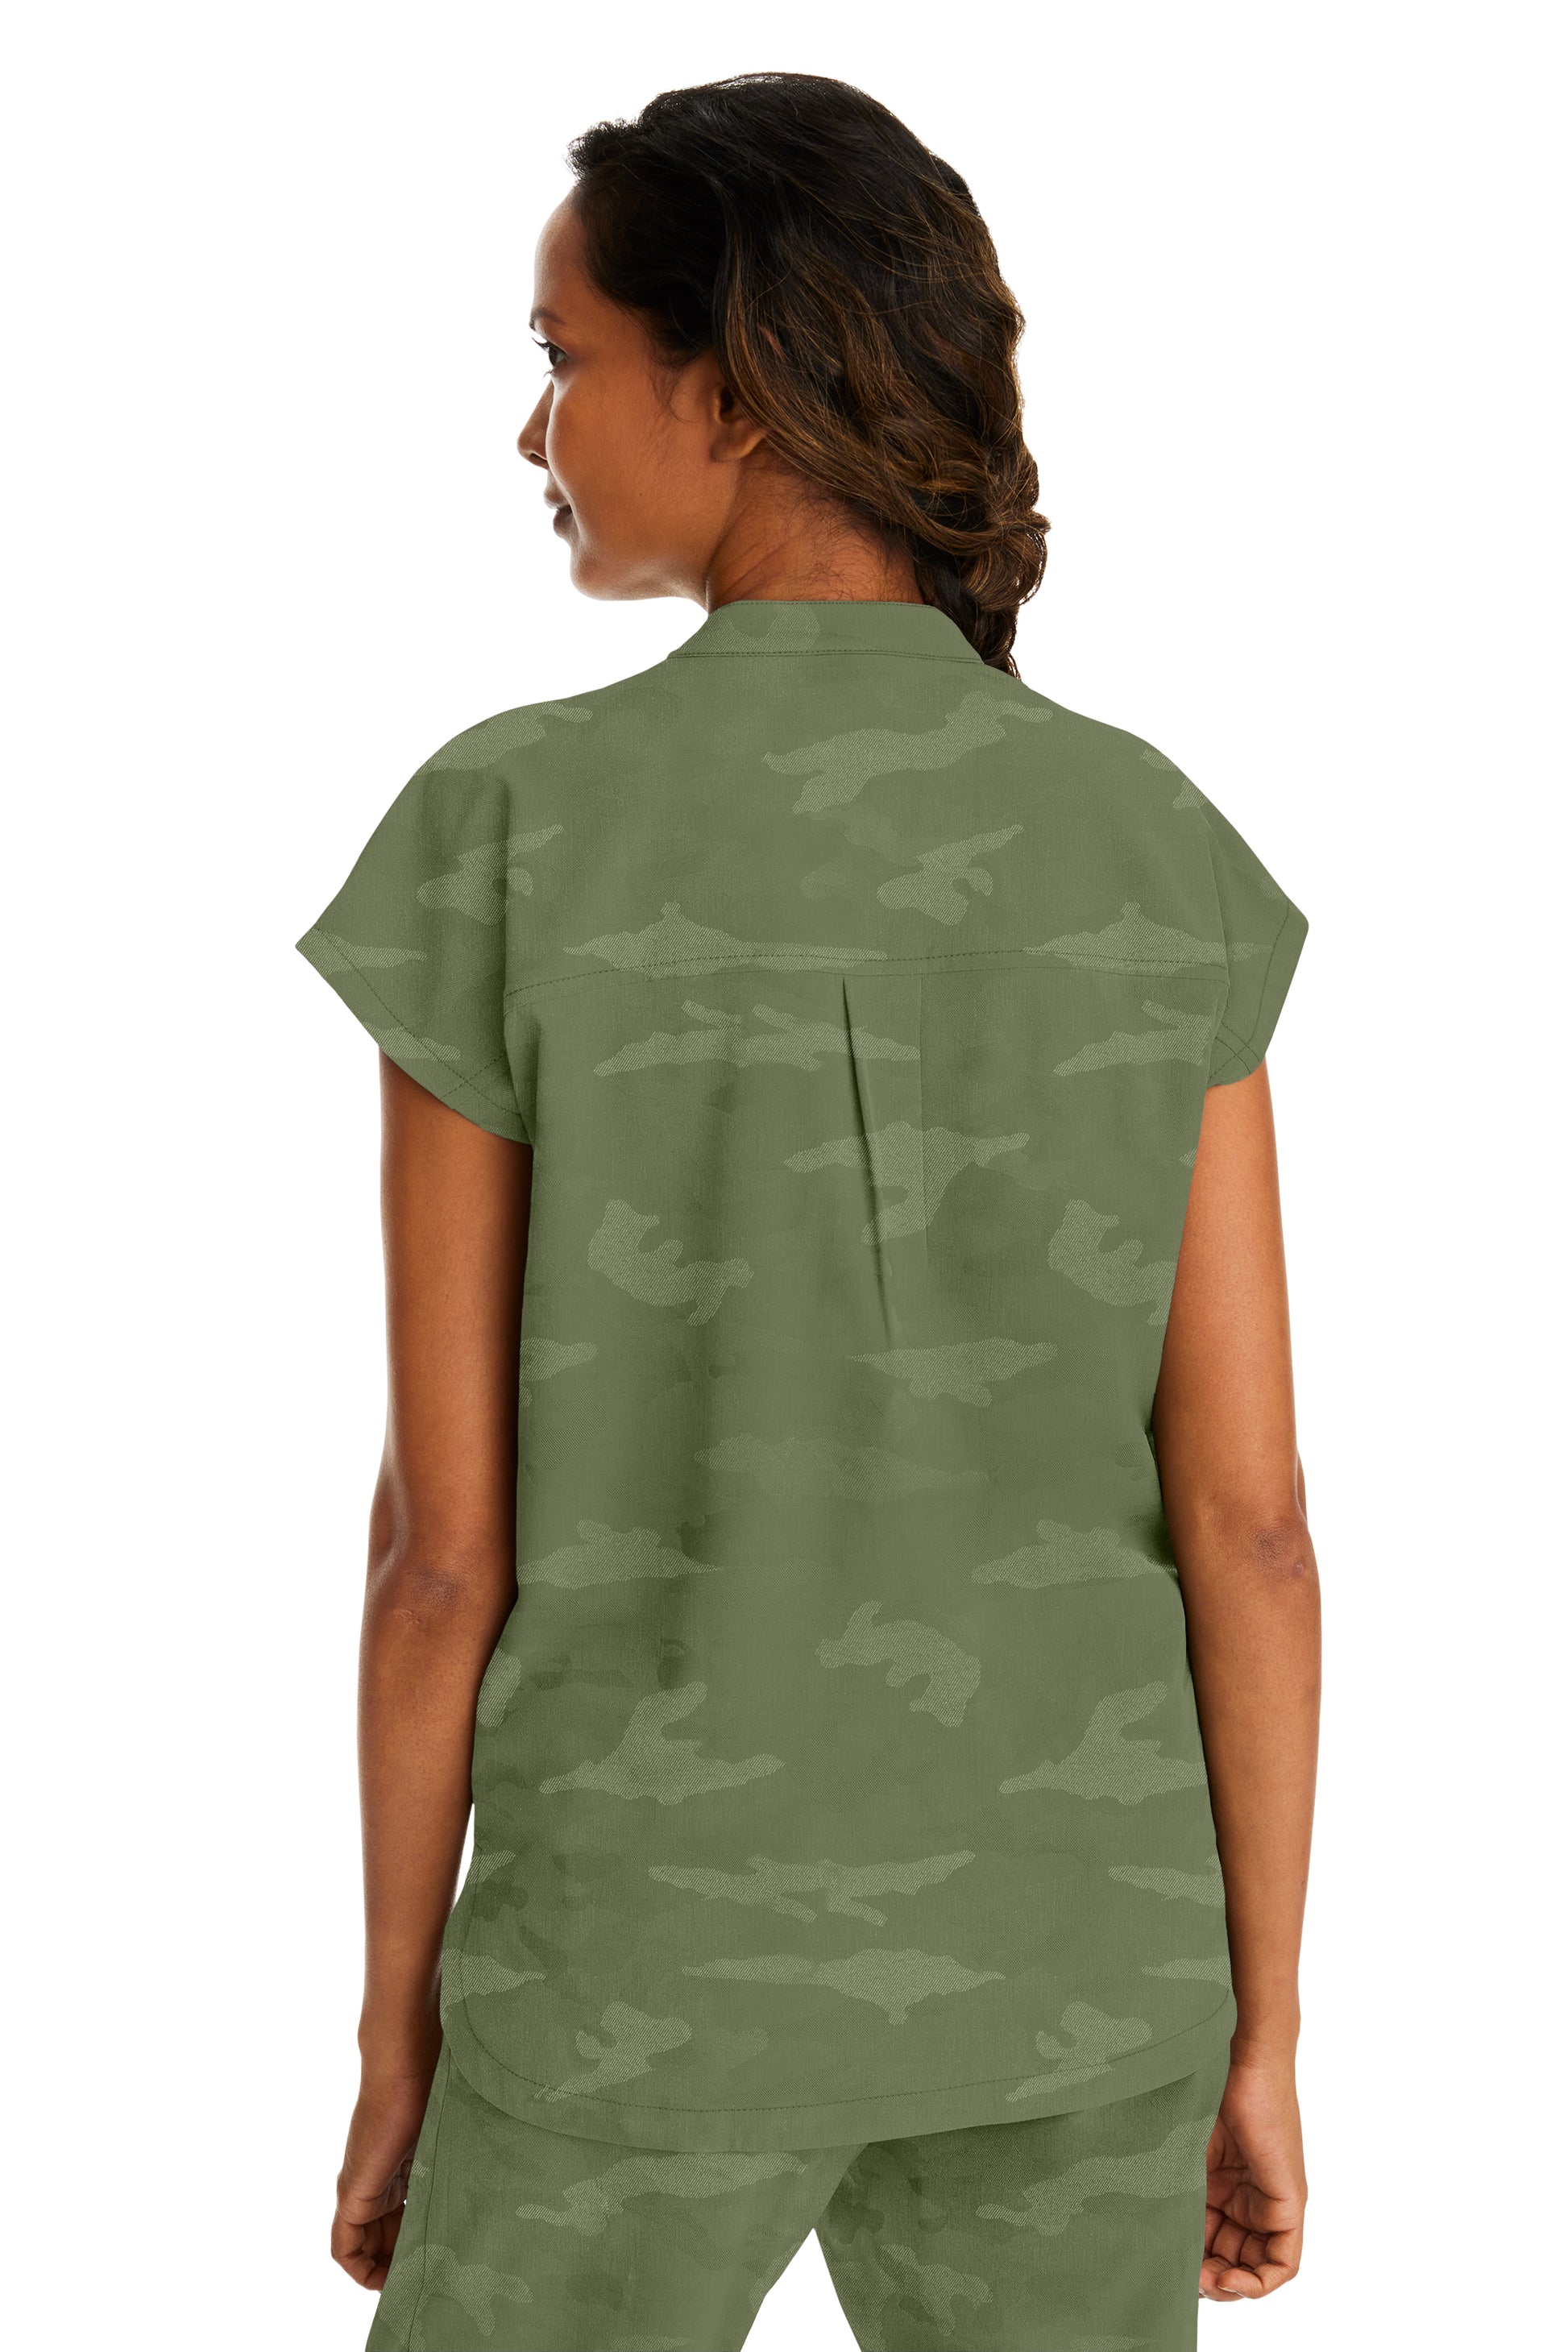 Healing Hands Purple Label Camo 2352 Journey Boxy Top Olive Green Back